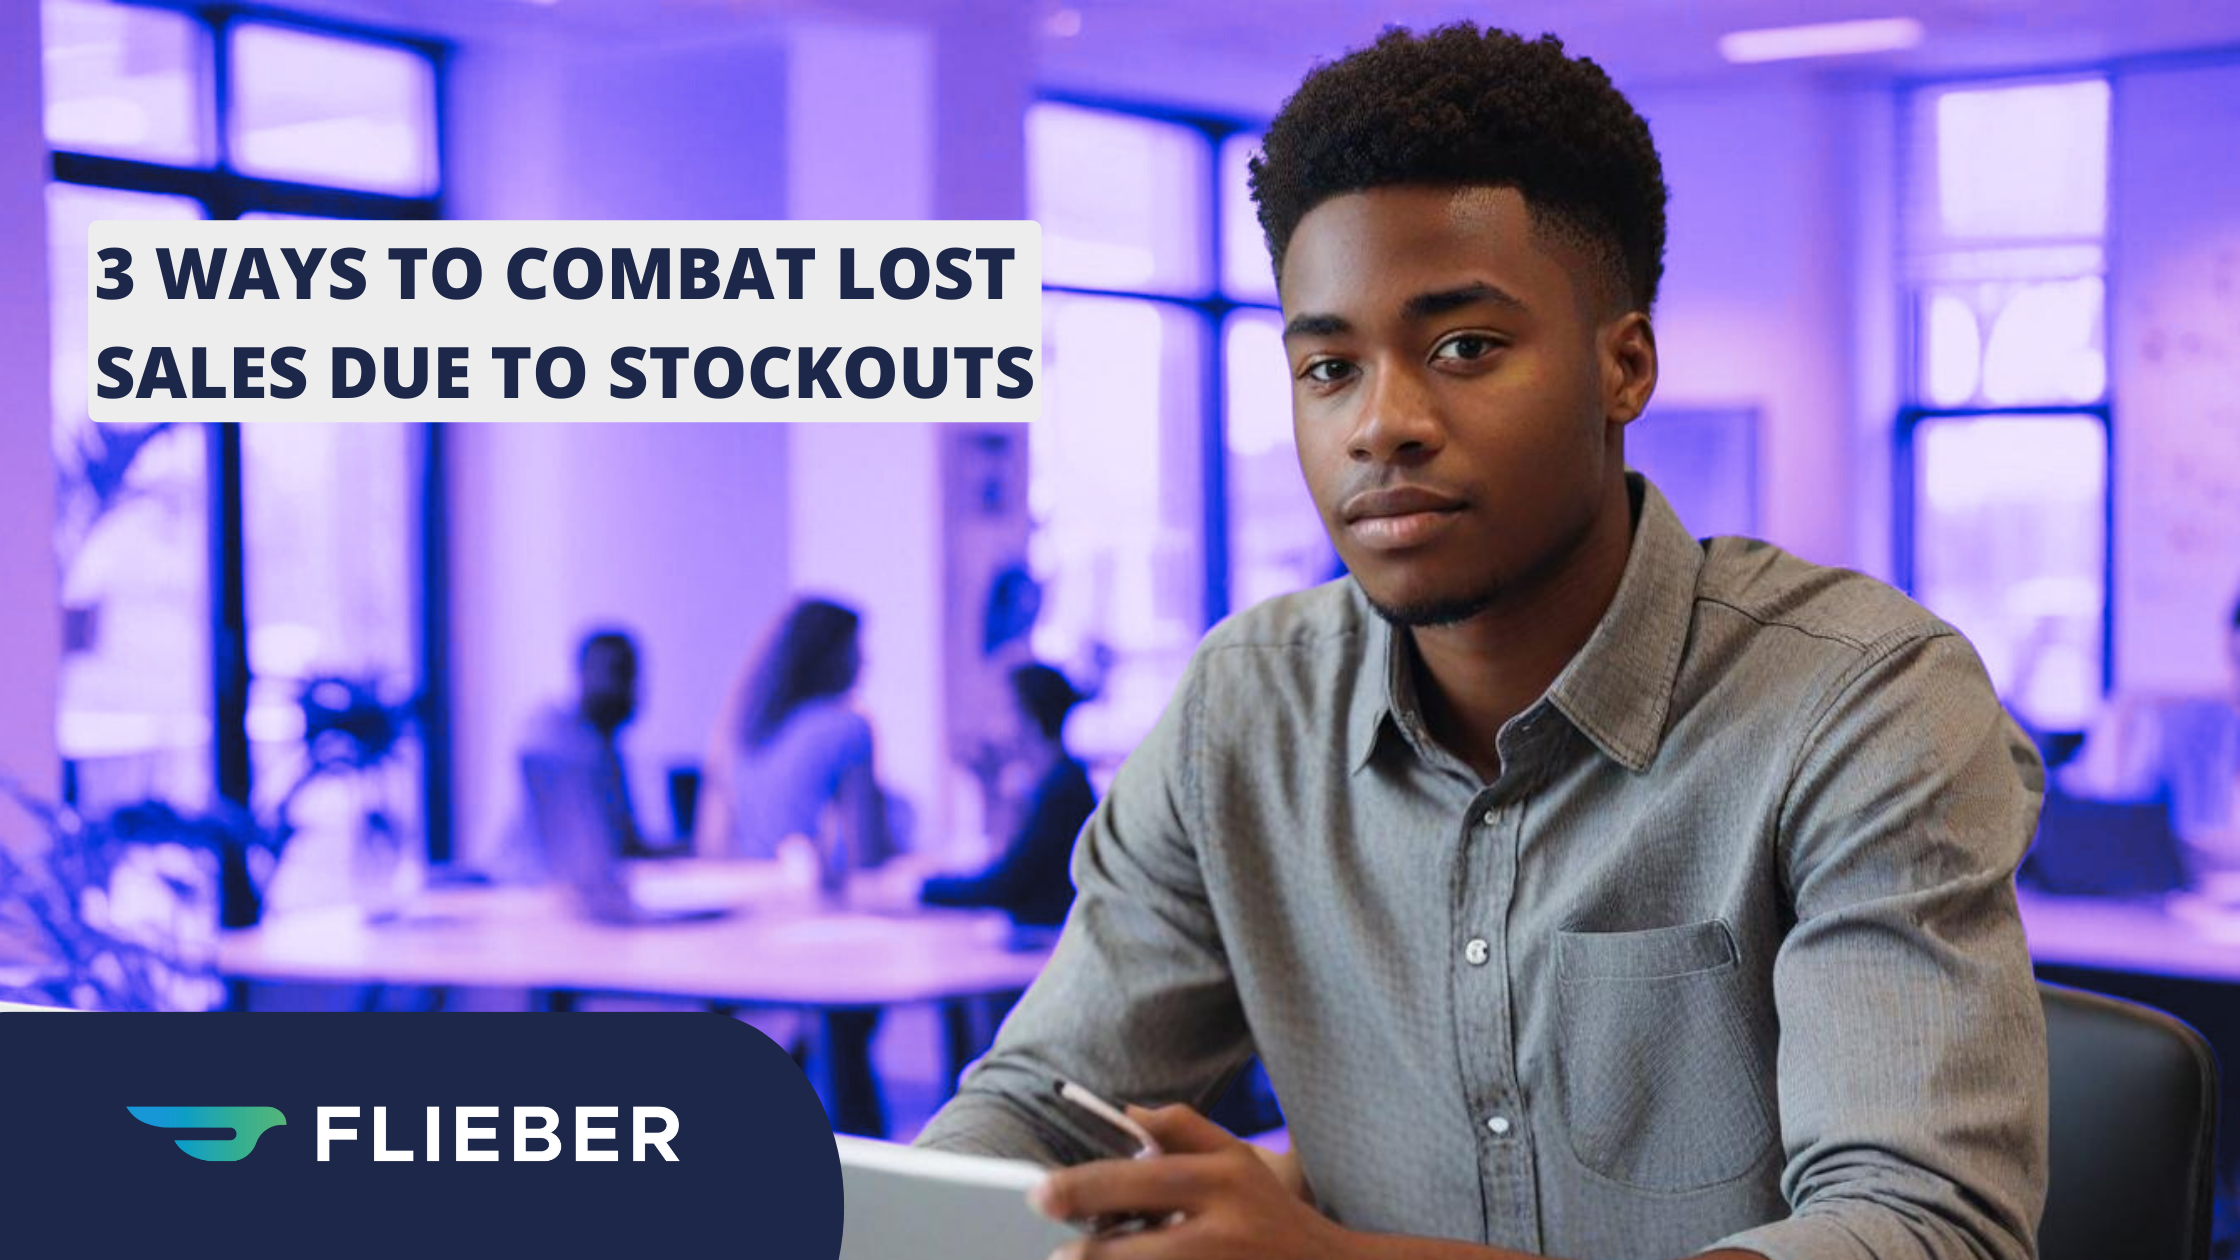 3 Ways to Combat Lost Sales Due to Stockouts